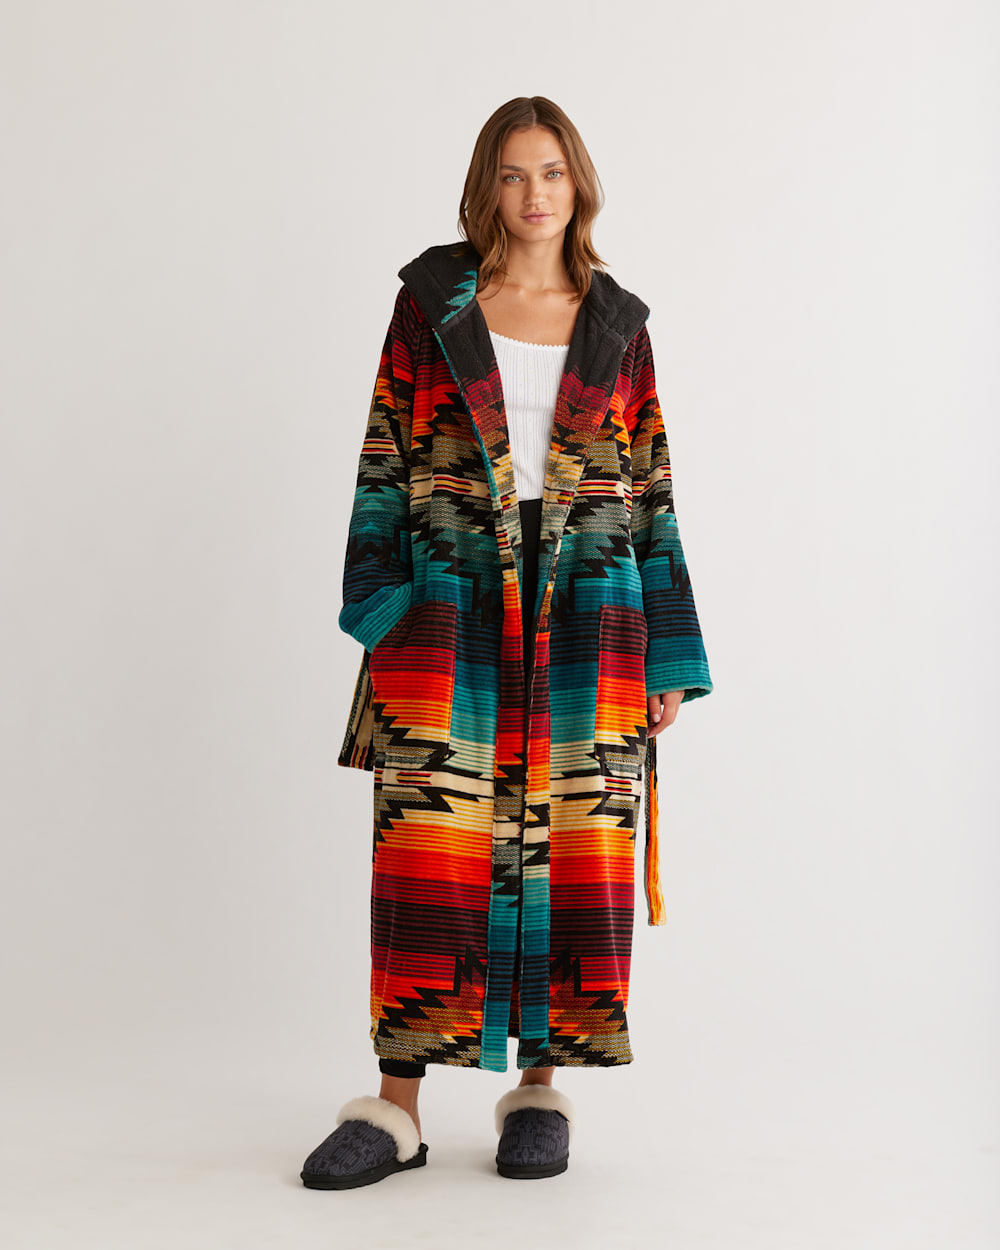 ALTERNATE VIEW OF UNISEX COTTON TERRY VELOUR ROBE IN SALTILLO SUNSET image number 5